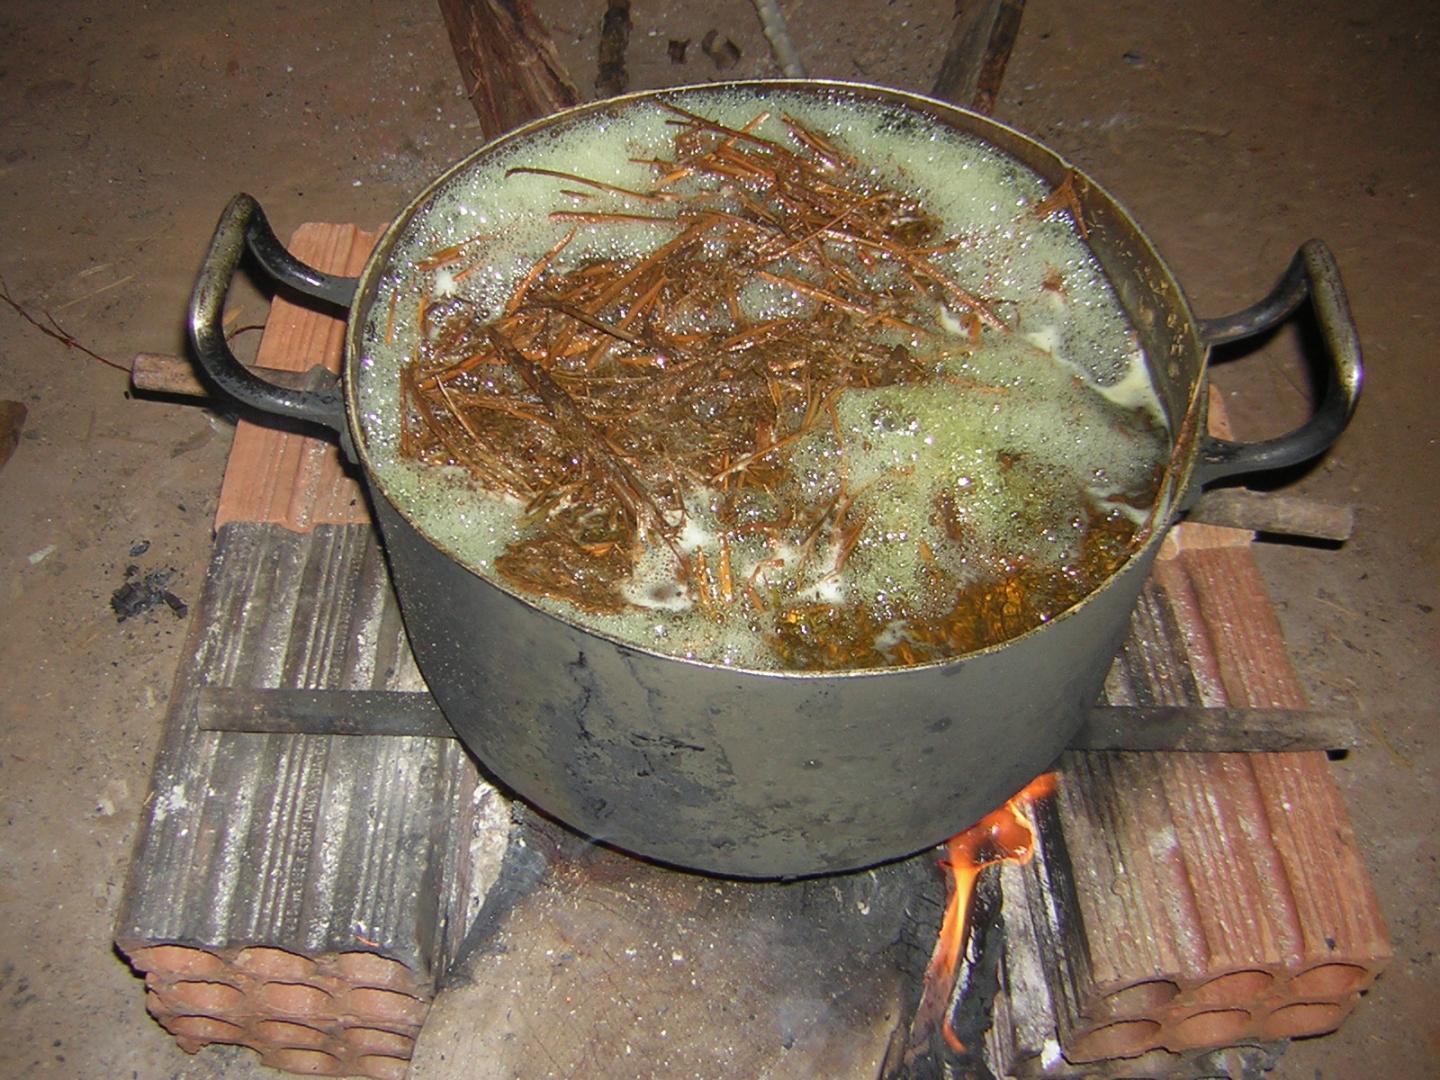 Ayahuasca is made by boiling stems of ayahuasca vines with the leaves of a plant called chacruna